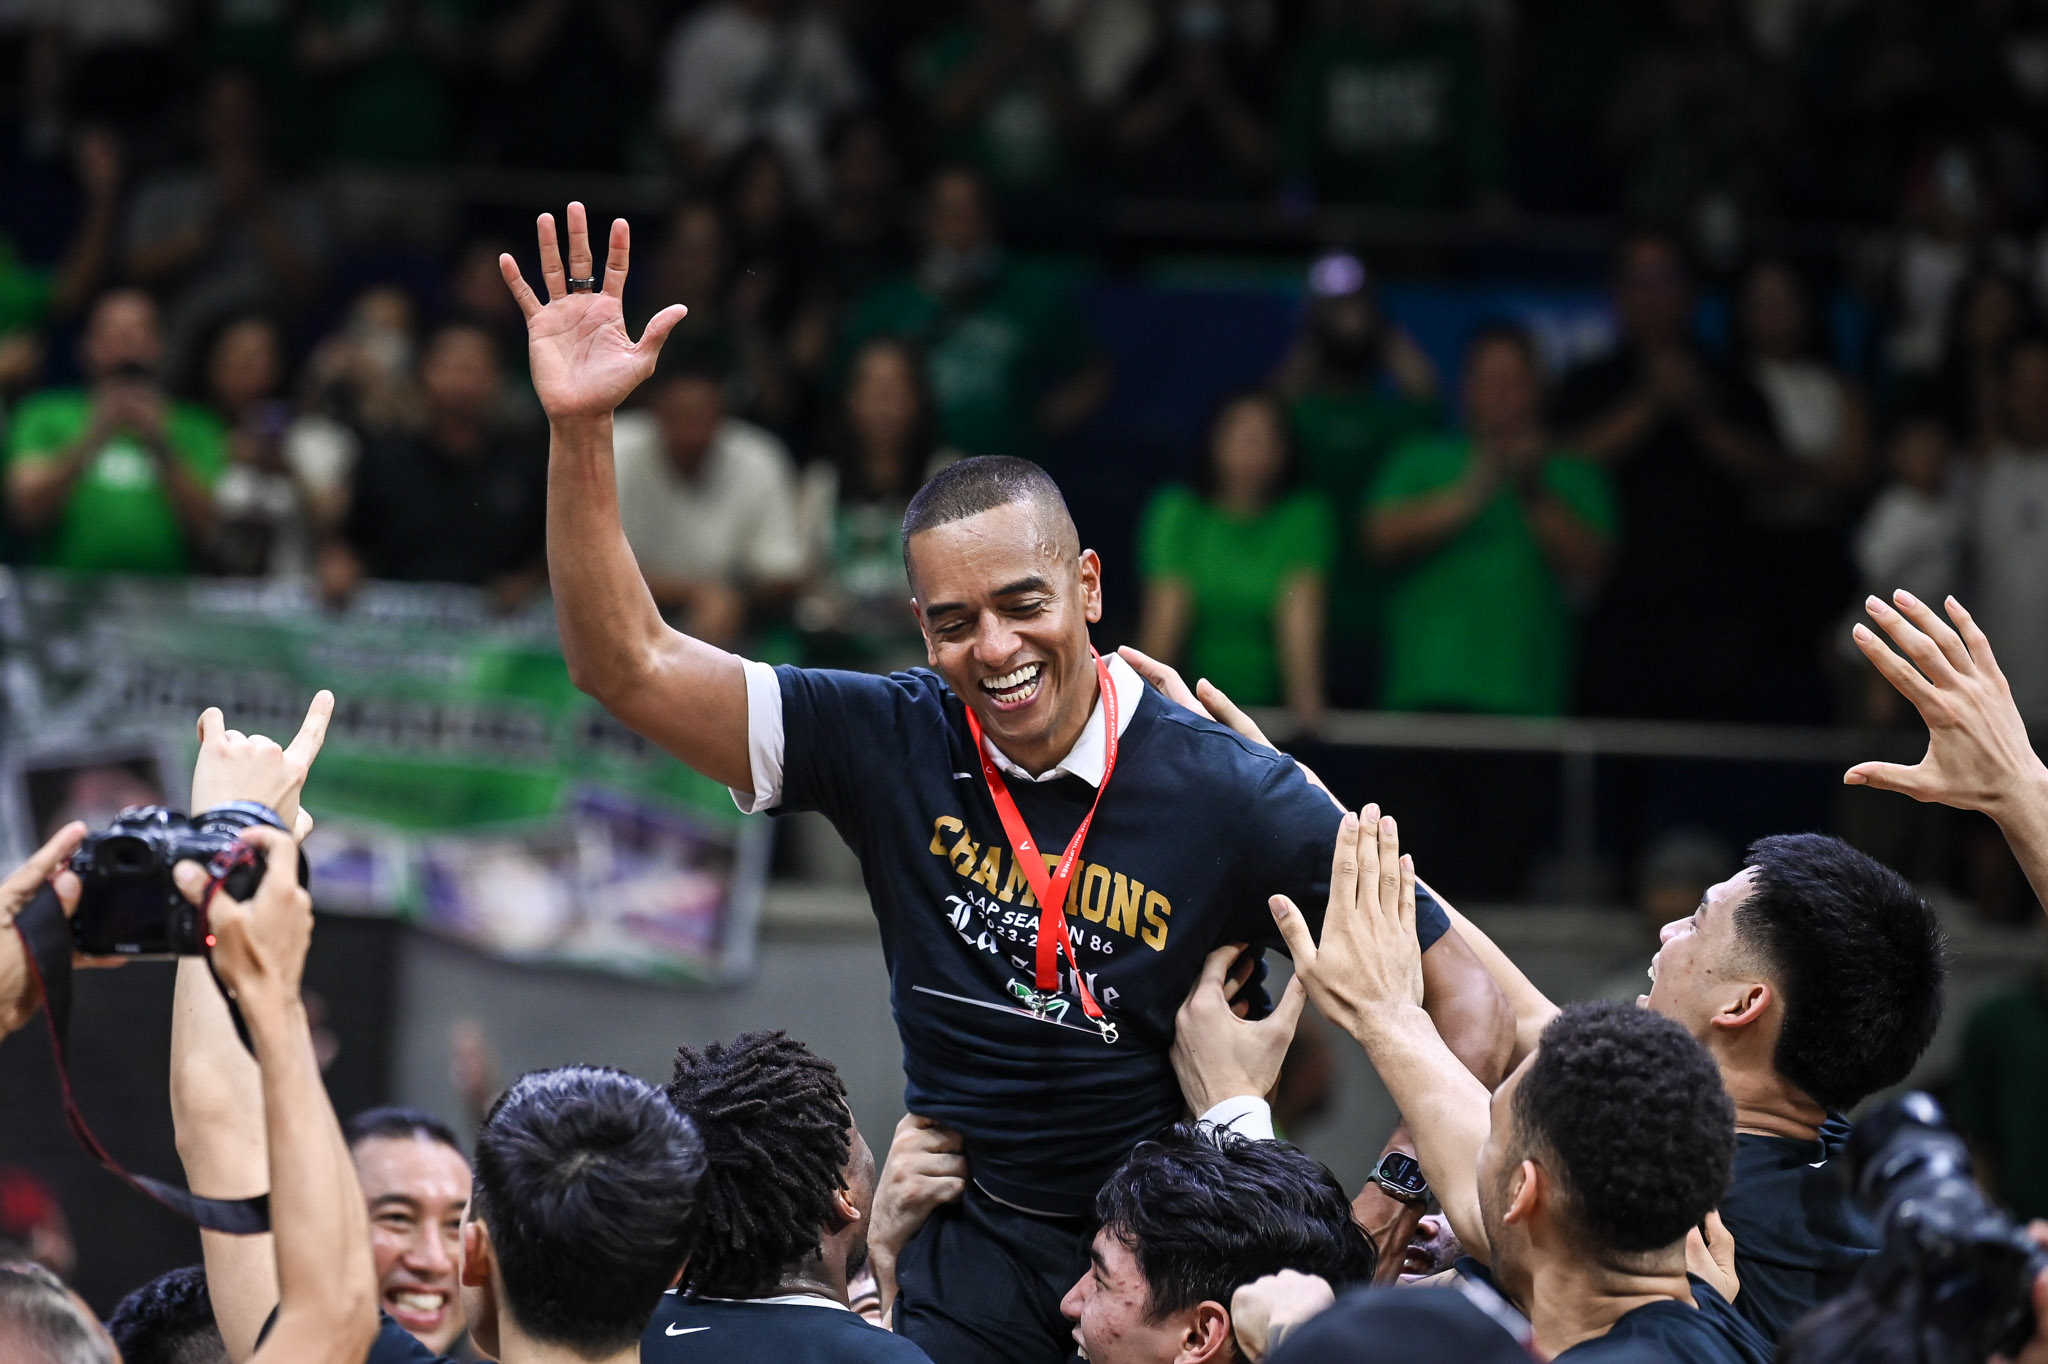 UAAP86-MBB-G3-Topex-Robinson-8180 Animo is Back: La Salle claims UAAP glory, defeats UP in nail-biting Game 3 for first MBB title in 7 Years Basketball DLSU News UAAP UP  - philippine sports news